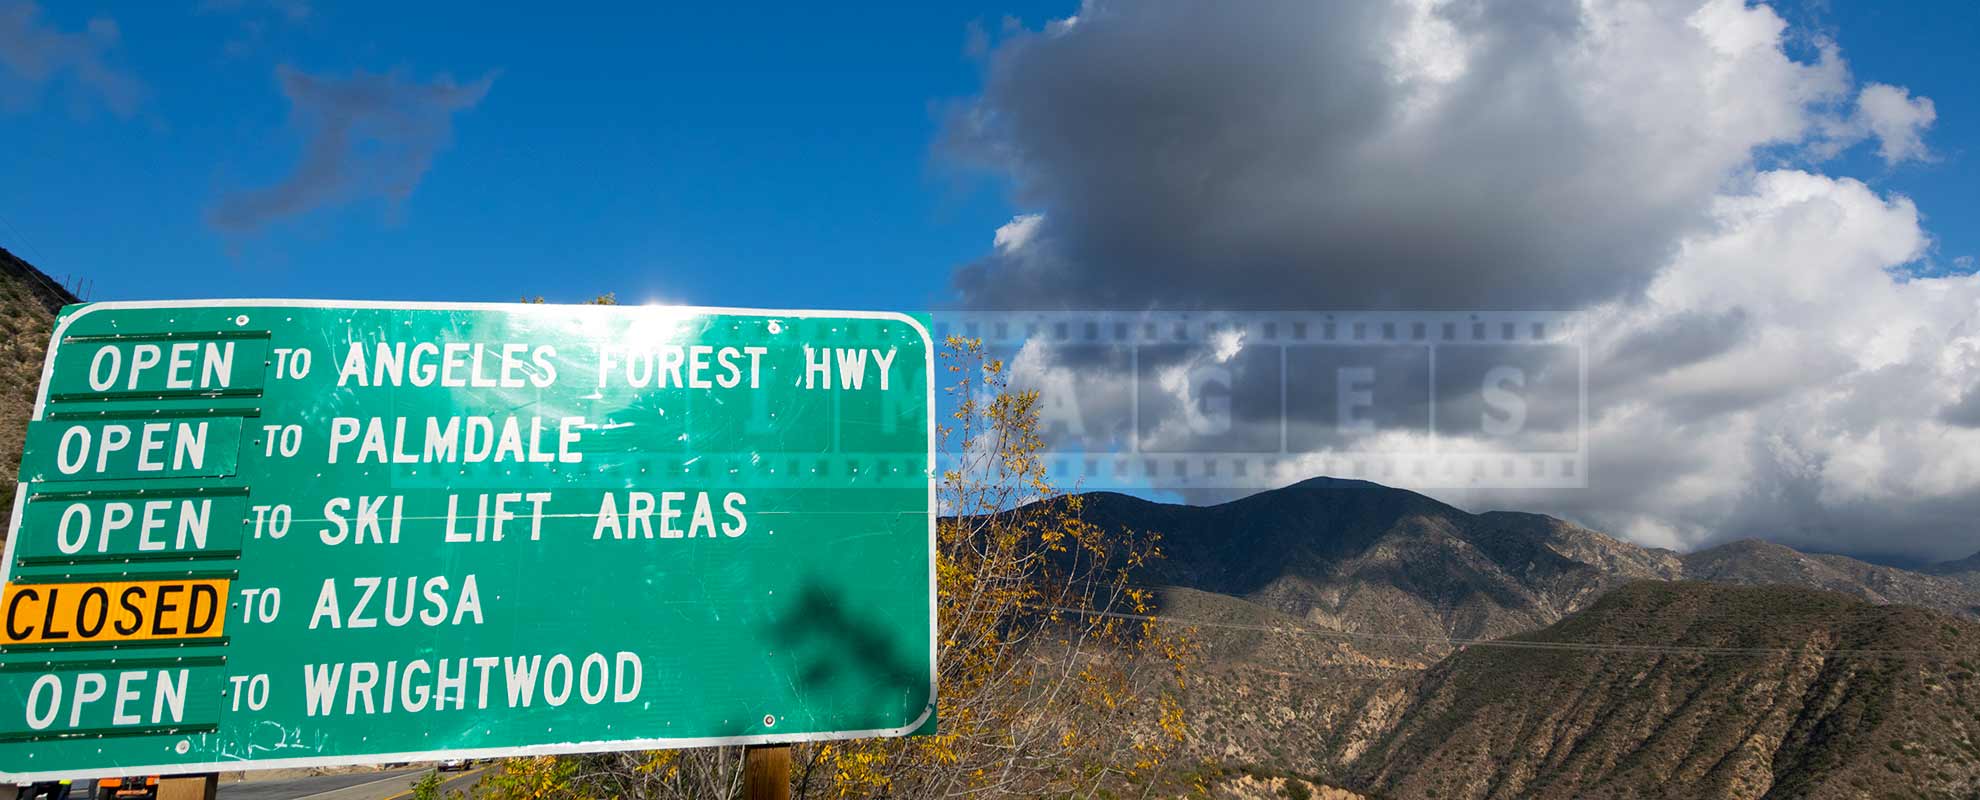 angeles forest highway open sign